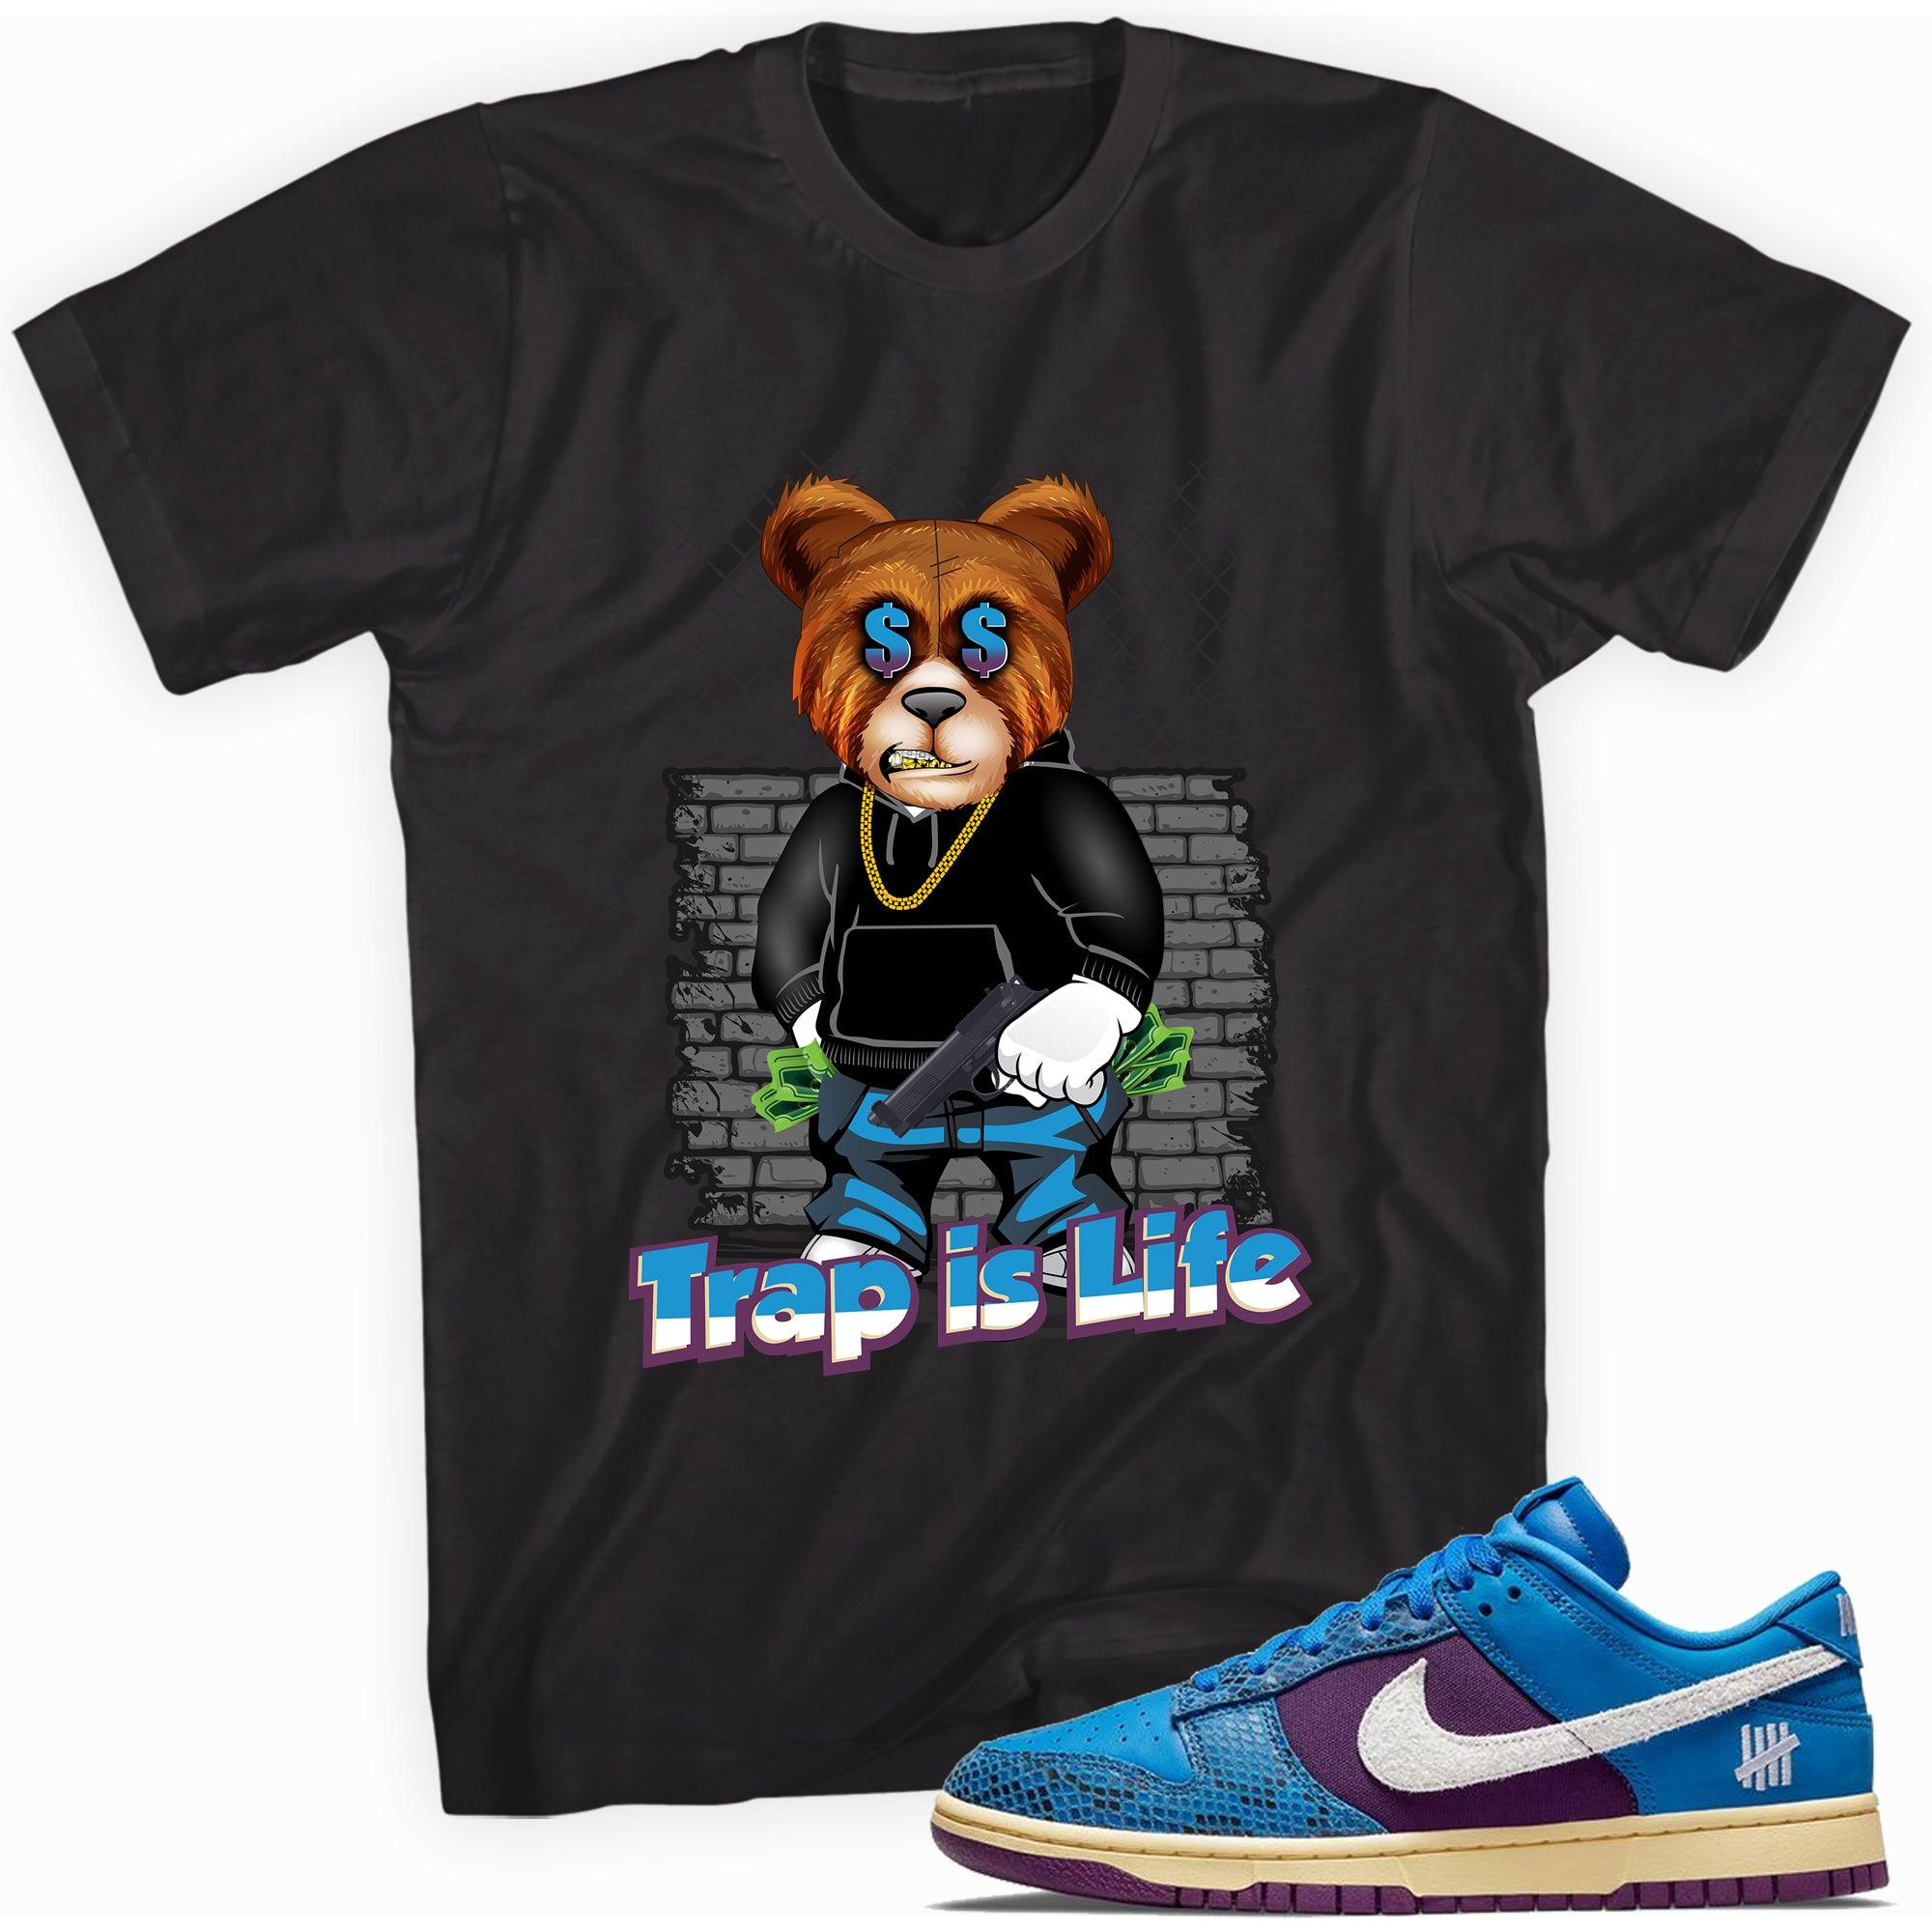 Black Trap Is Life Shirt Nike Dunk Low Undefeated 5 On It Dunk vs AF1 photo